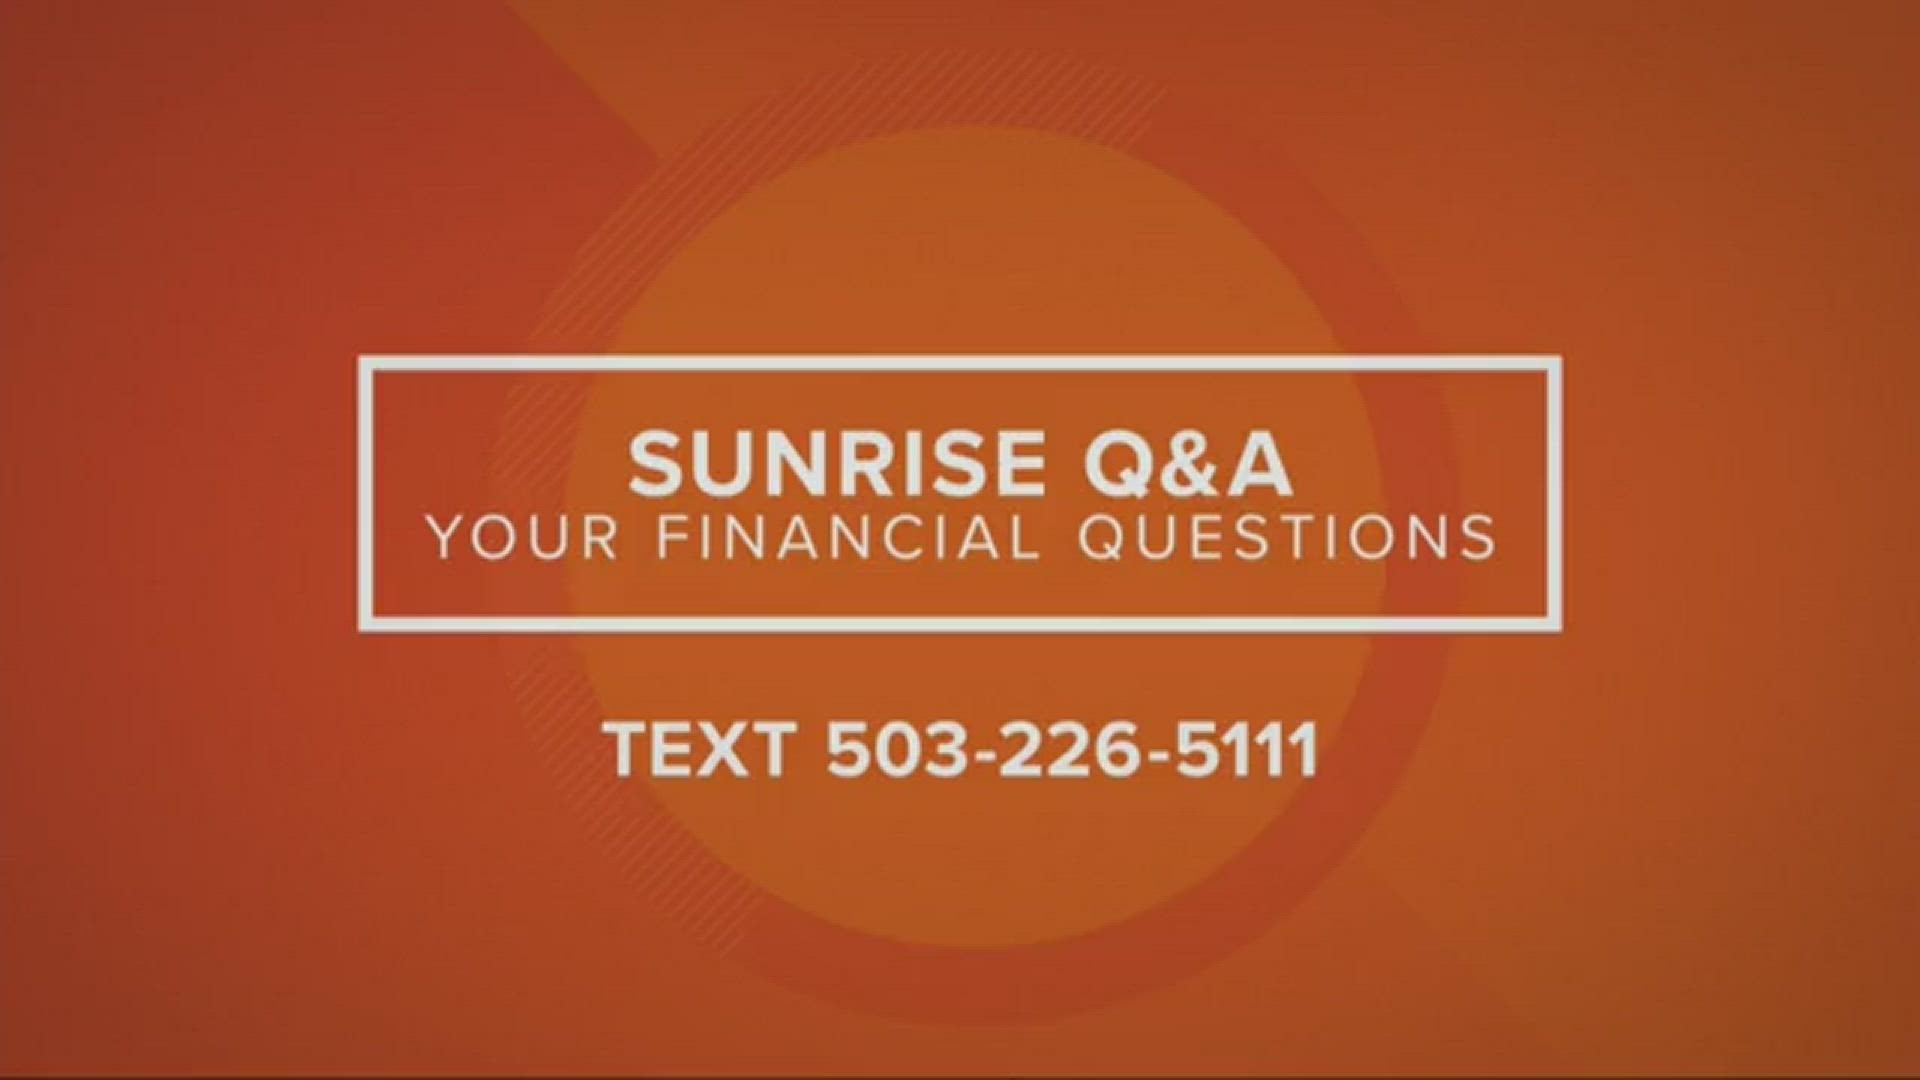 Your financial questions answered during this special Sunrise Extra livestream